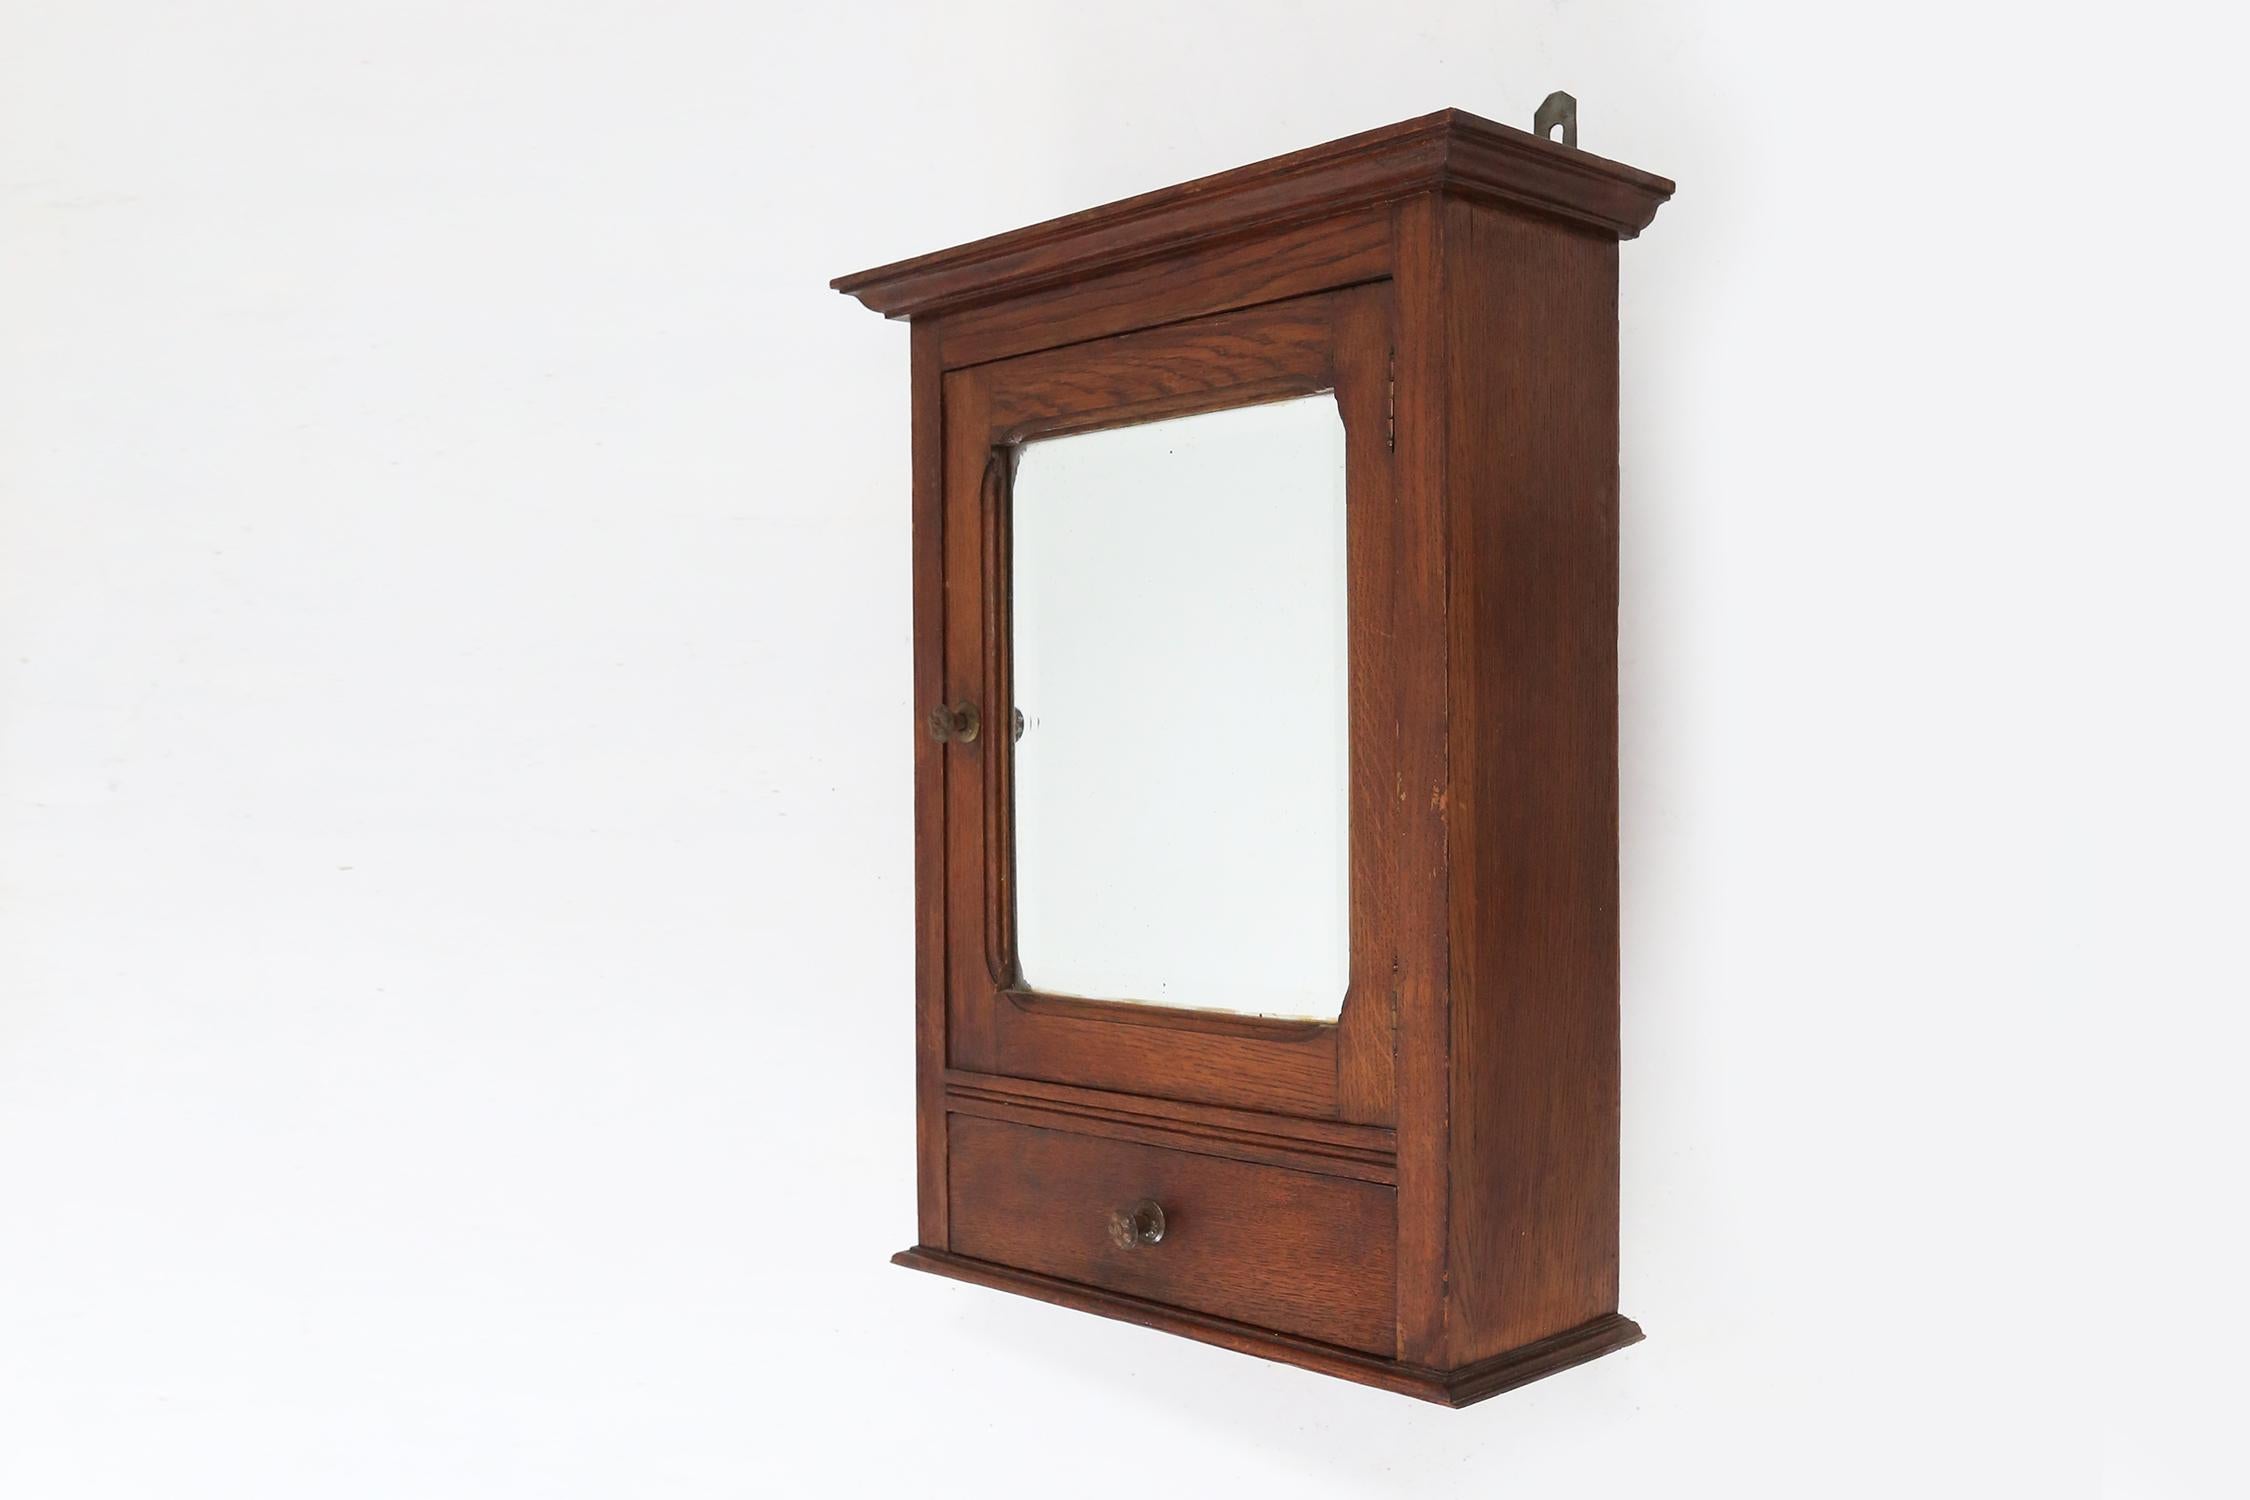 Small cabinet or shaving cabinet.
in a good condition.
Has a mirror and a small drawer.